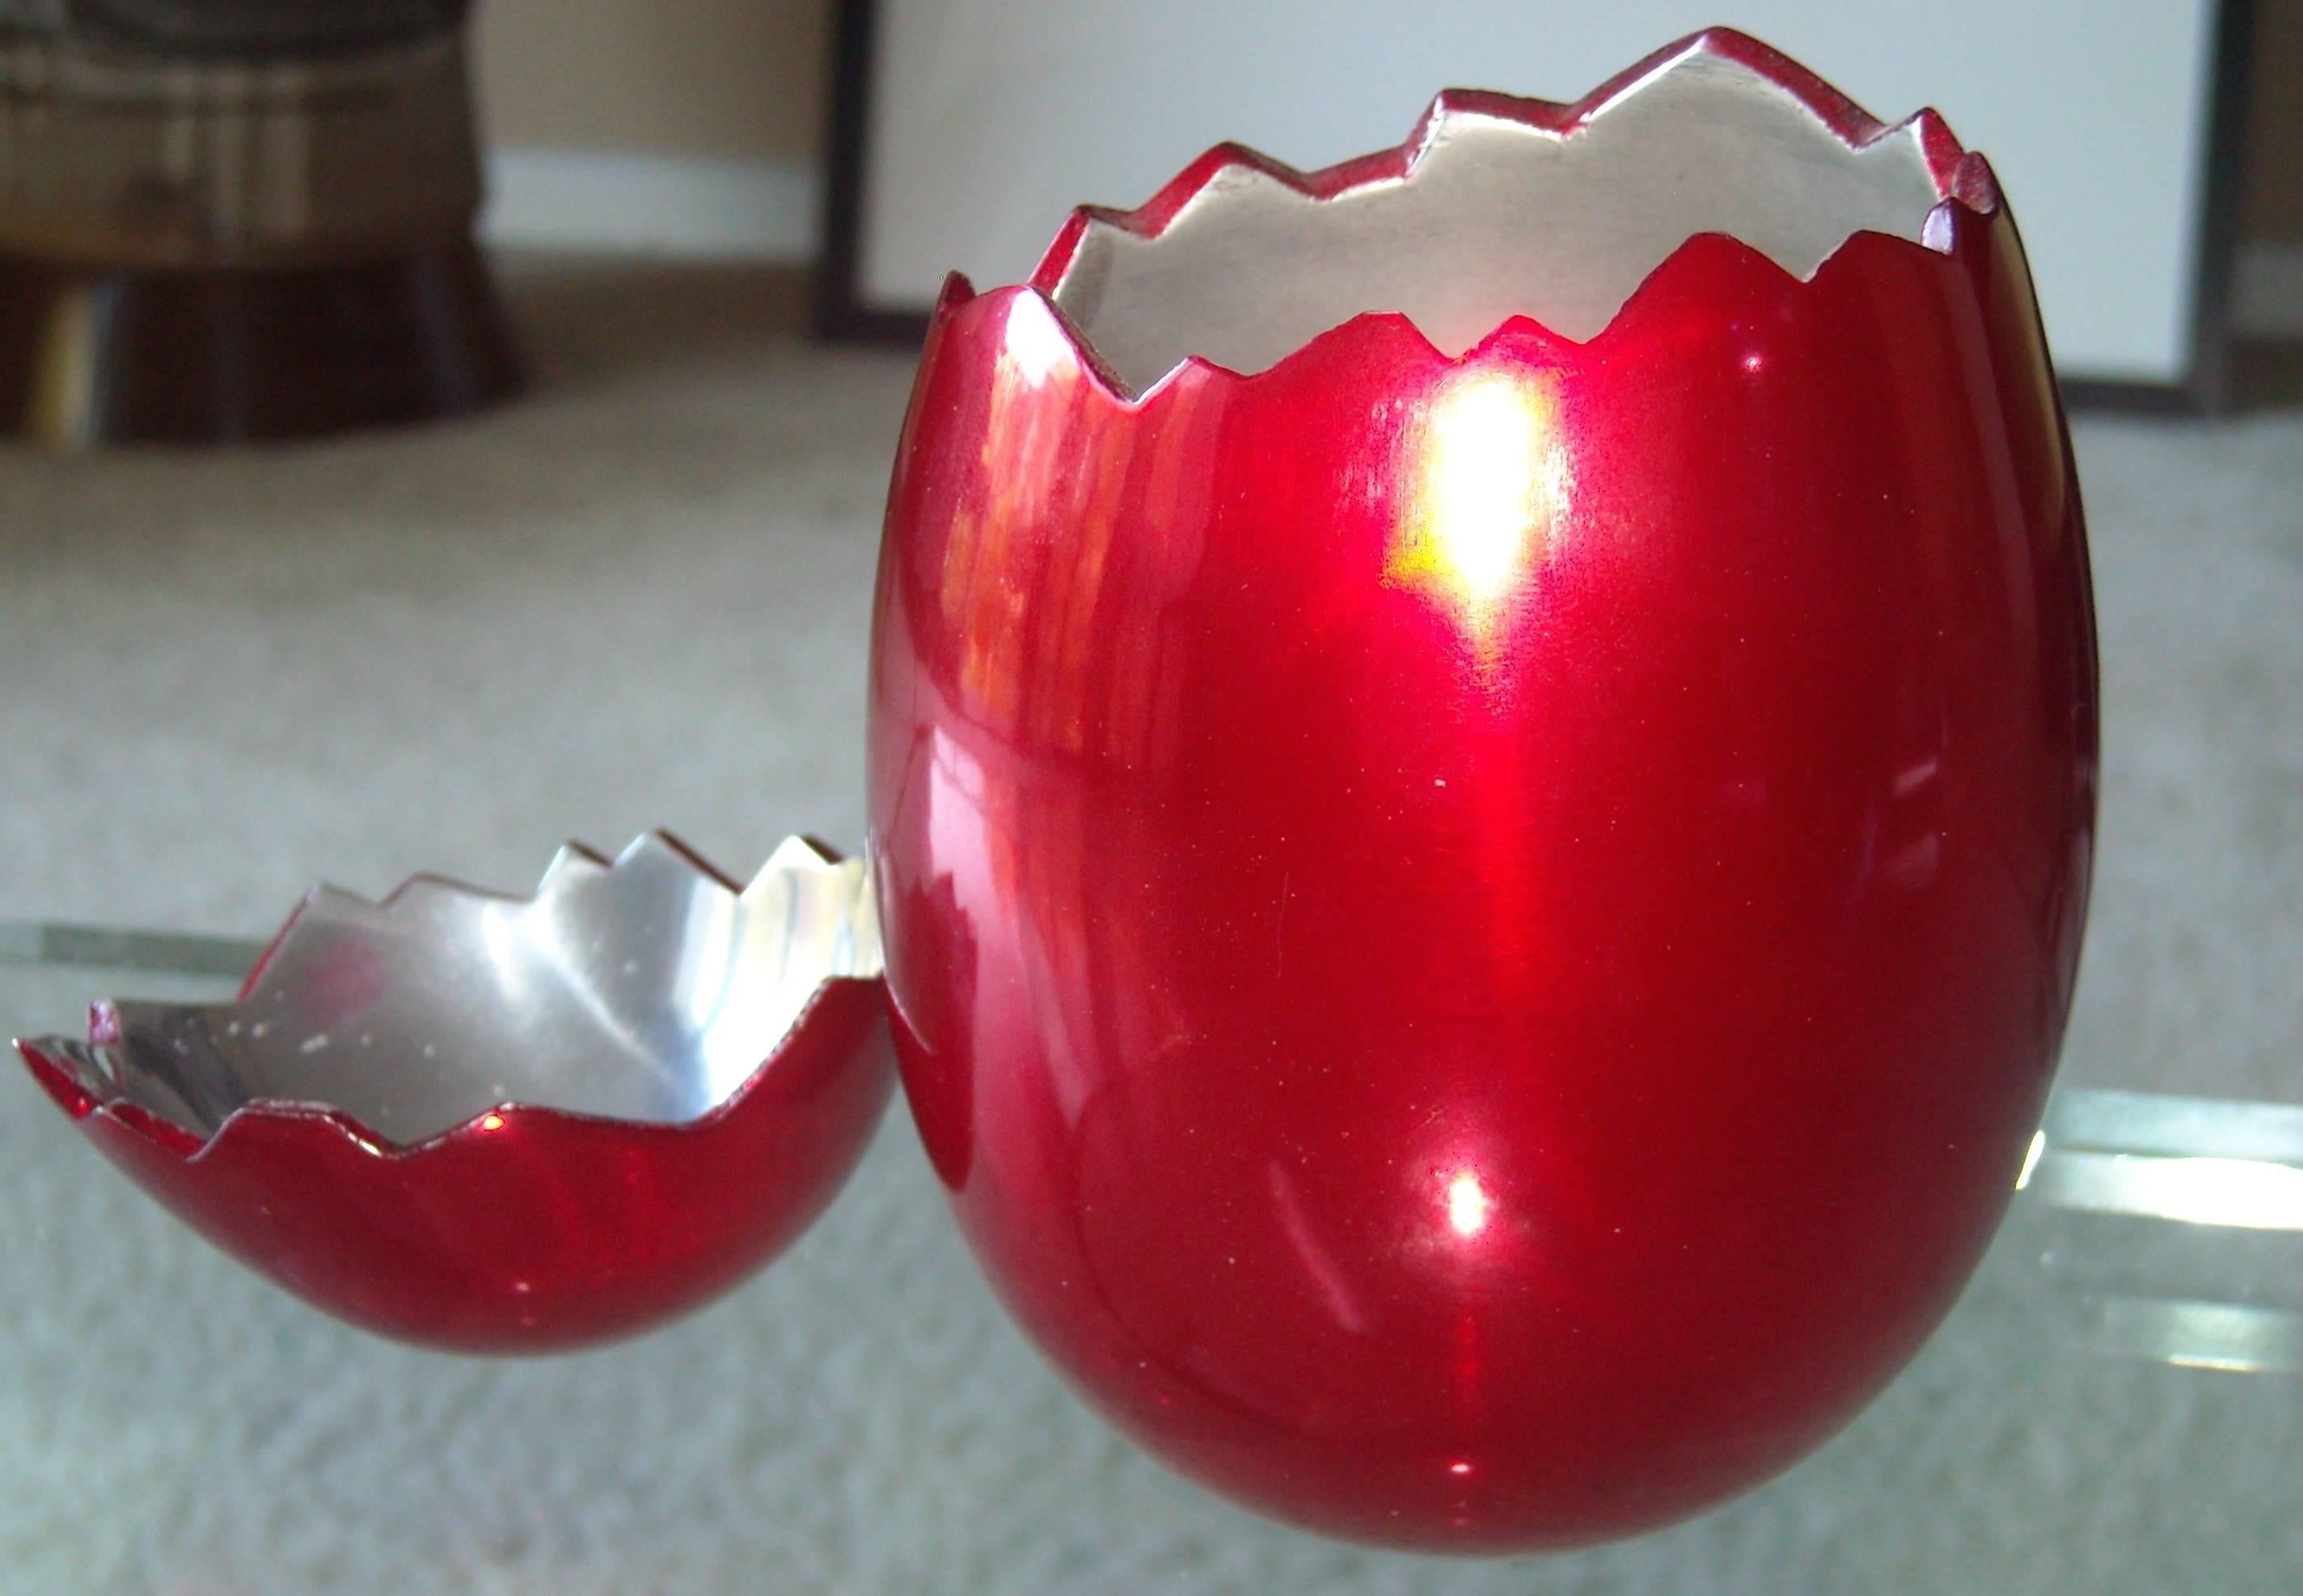 Very well-known aluminum box sculpture in shape of an egg by Jaff Koons, does not have the original box.